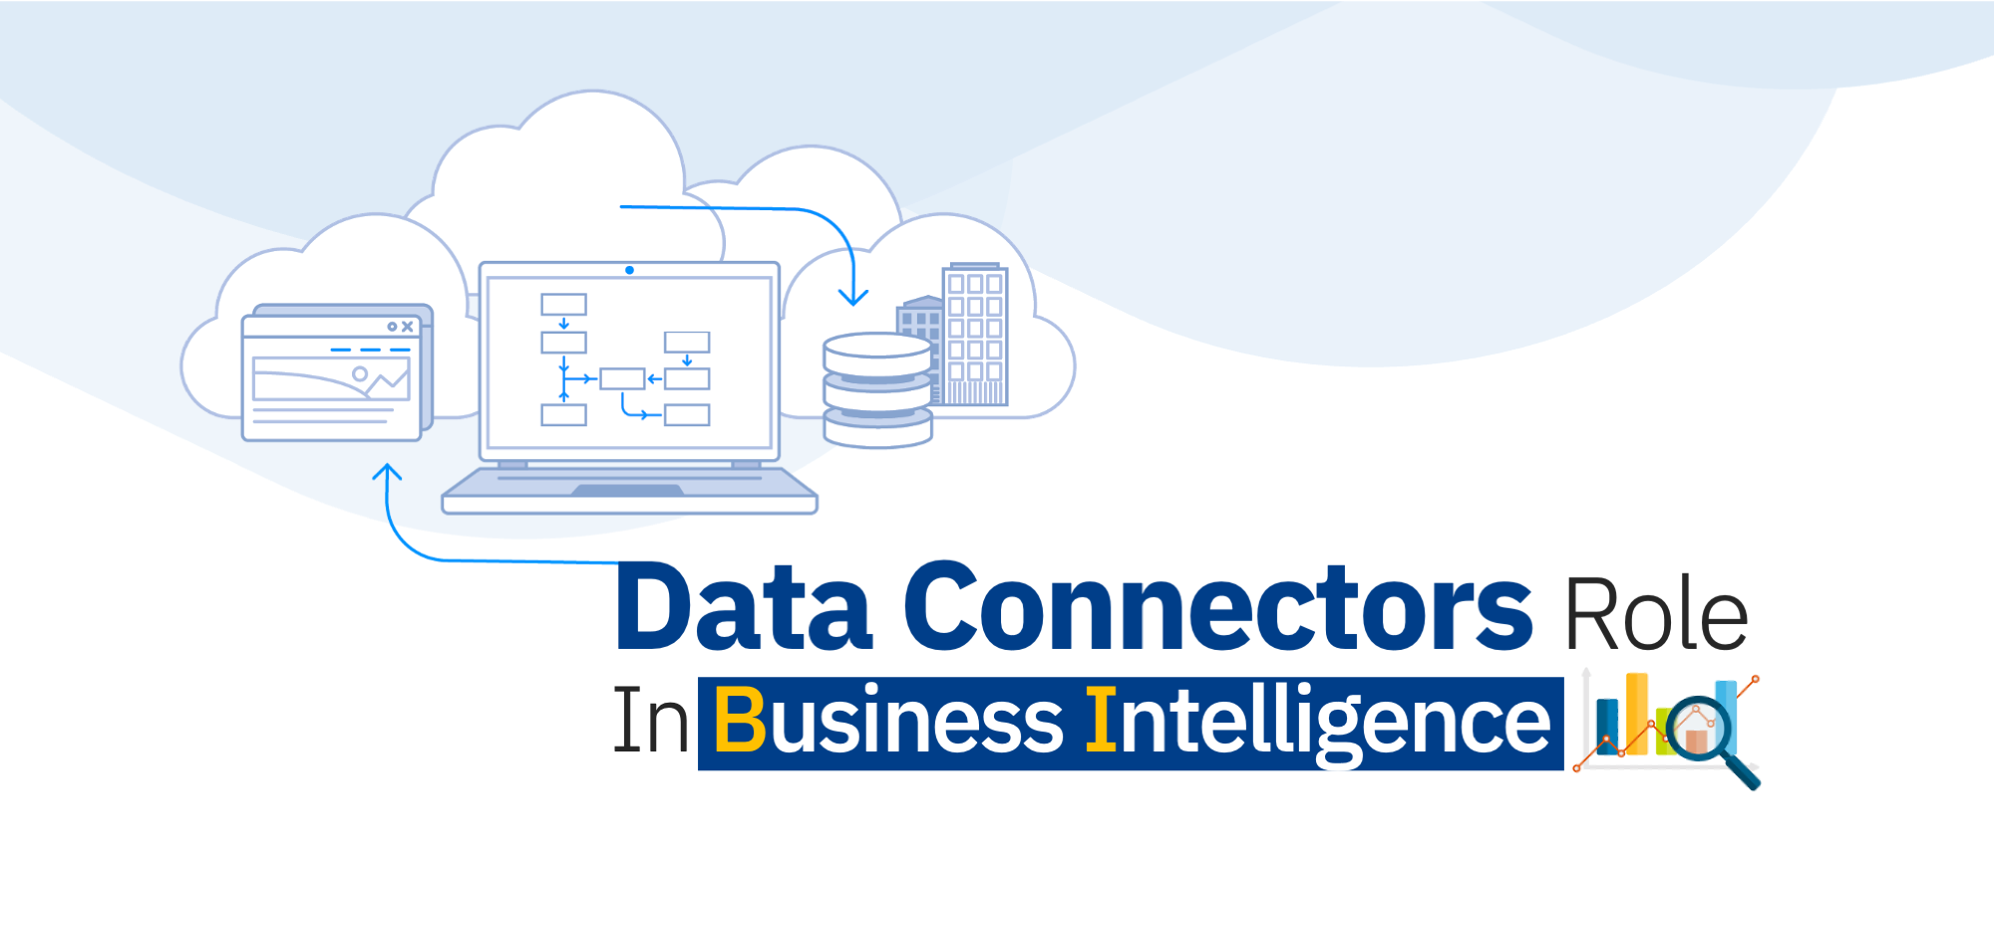 Data Connectors Role in Business Intelligence